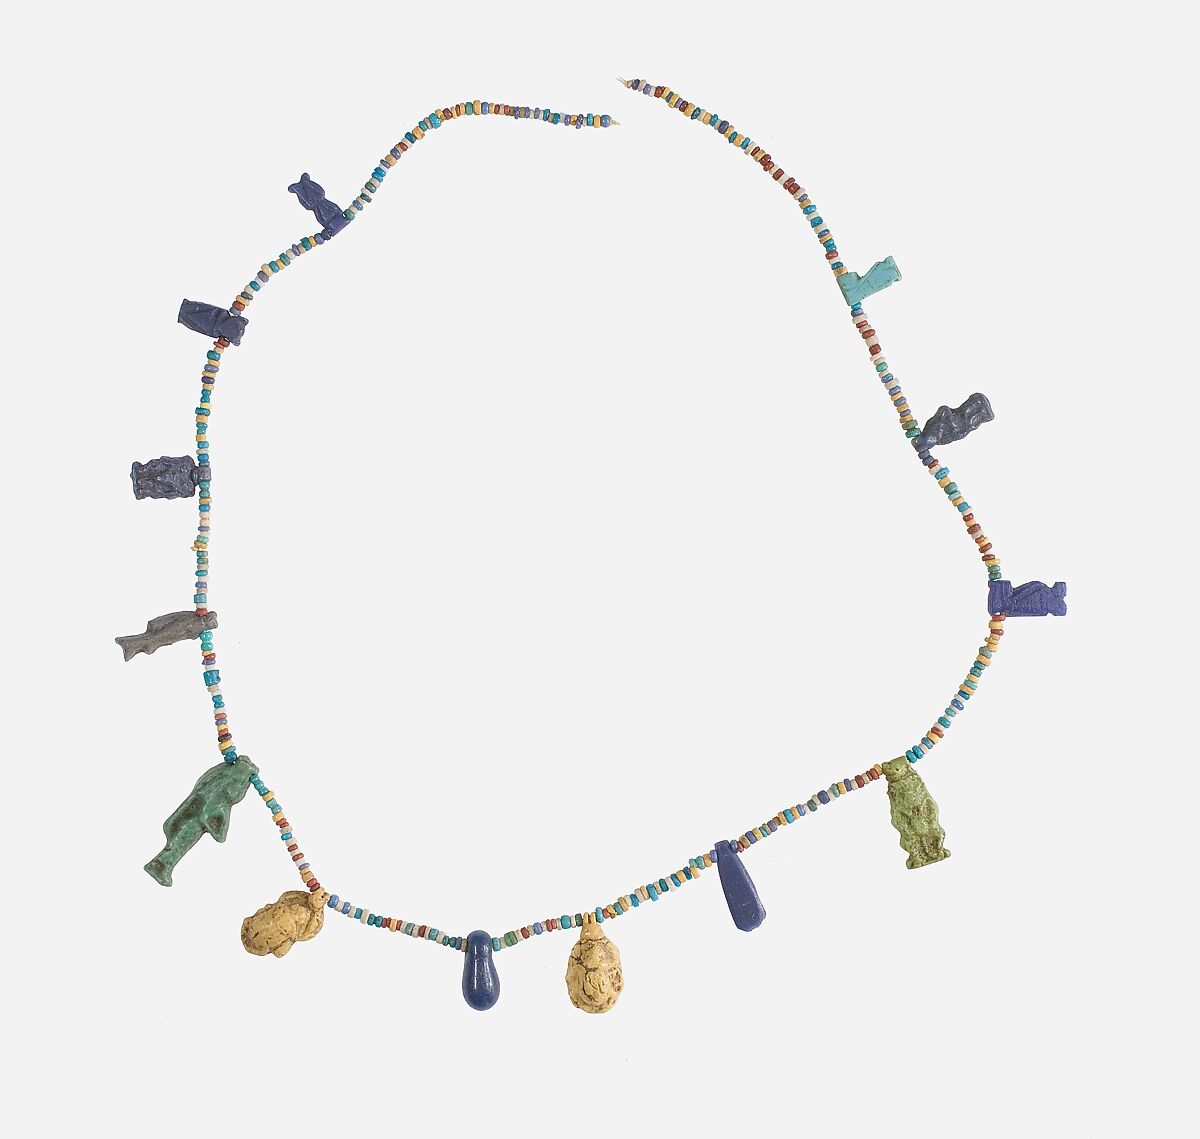 Necklace with Amulets | New Kingdom | The Metropolitan Museum of Art